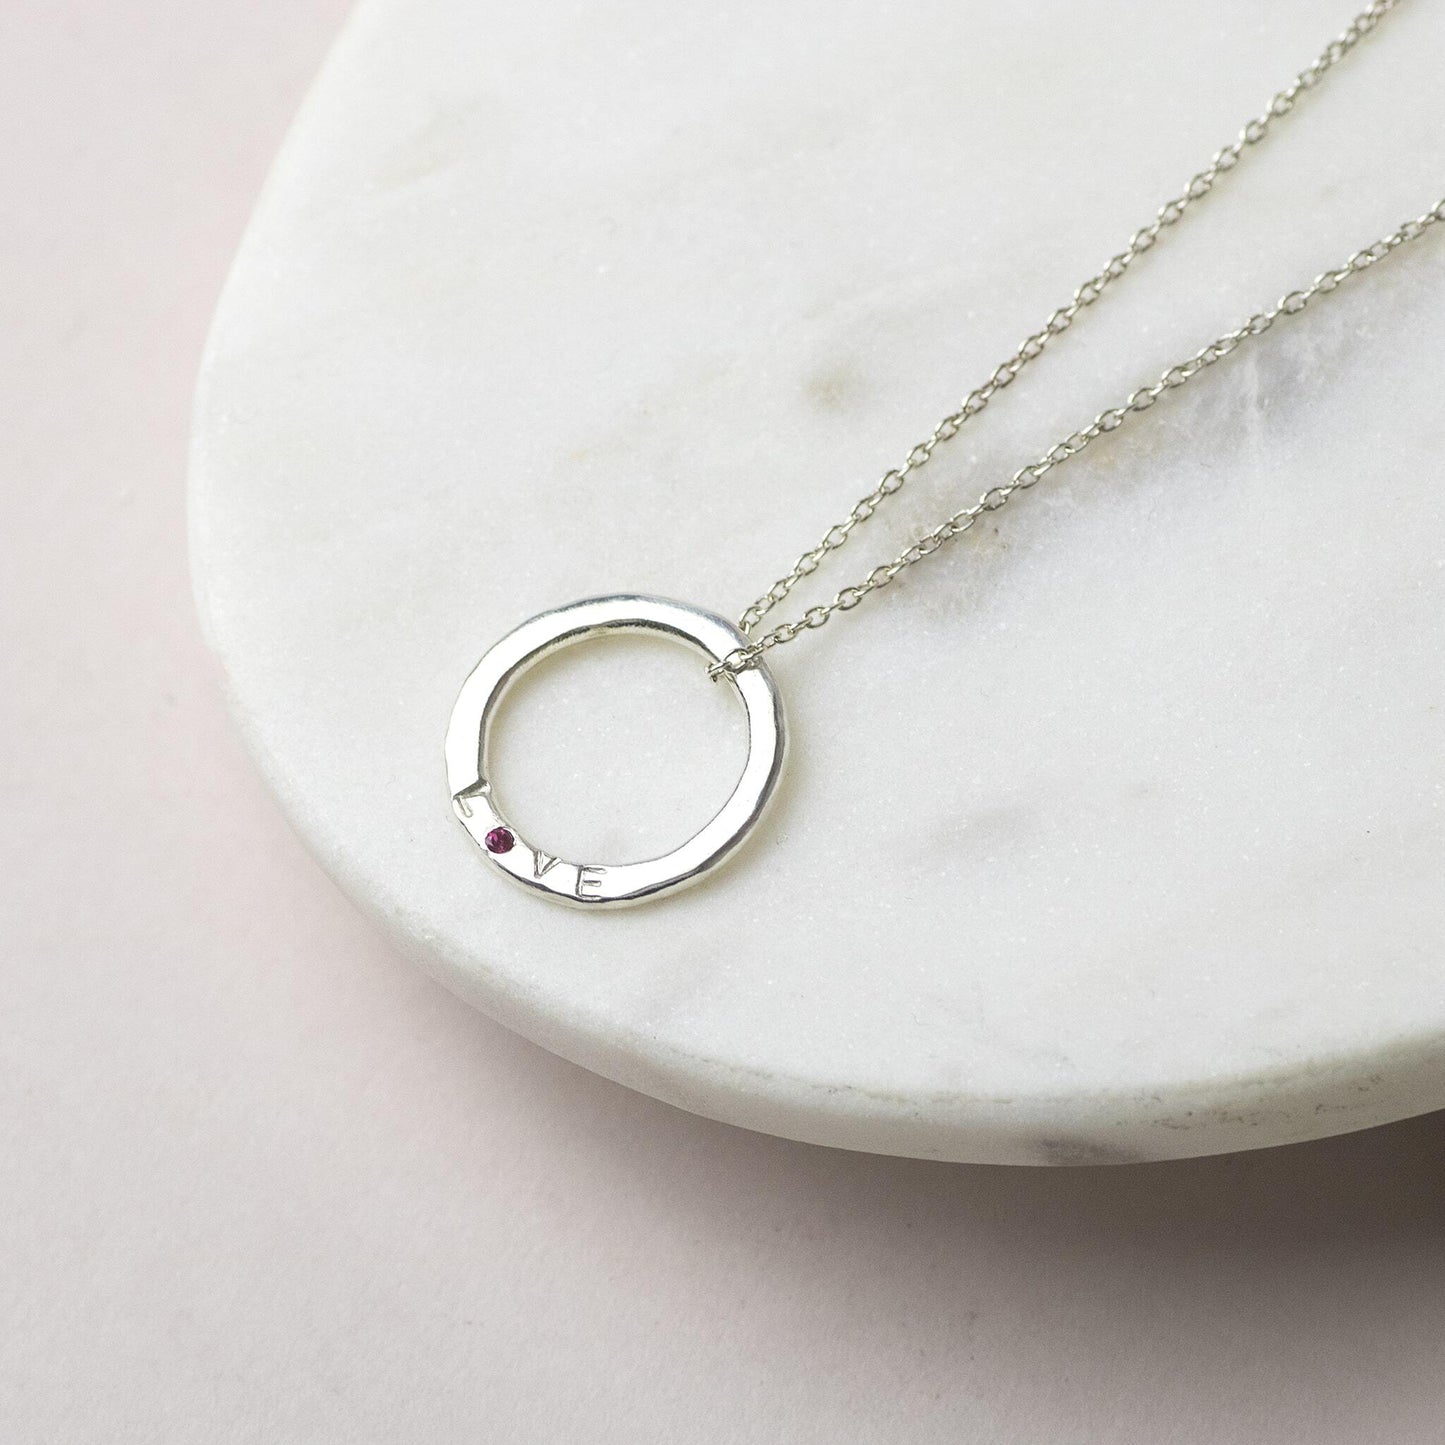 Christmas Gift for Loved One - Silver Love Necklace with Birthstone